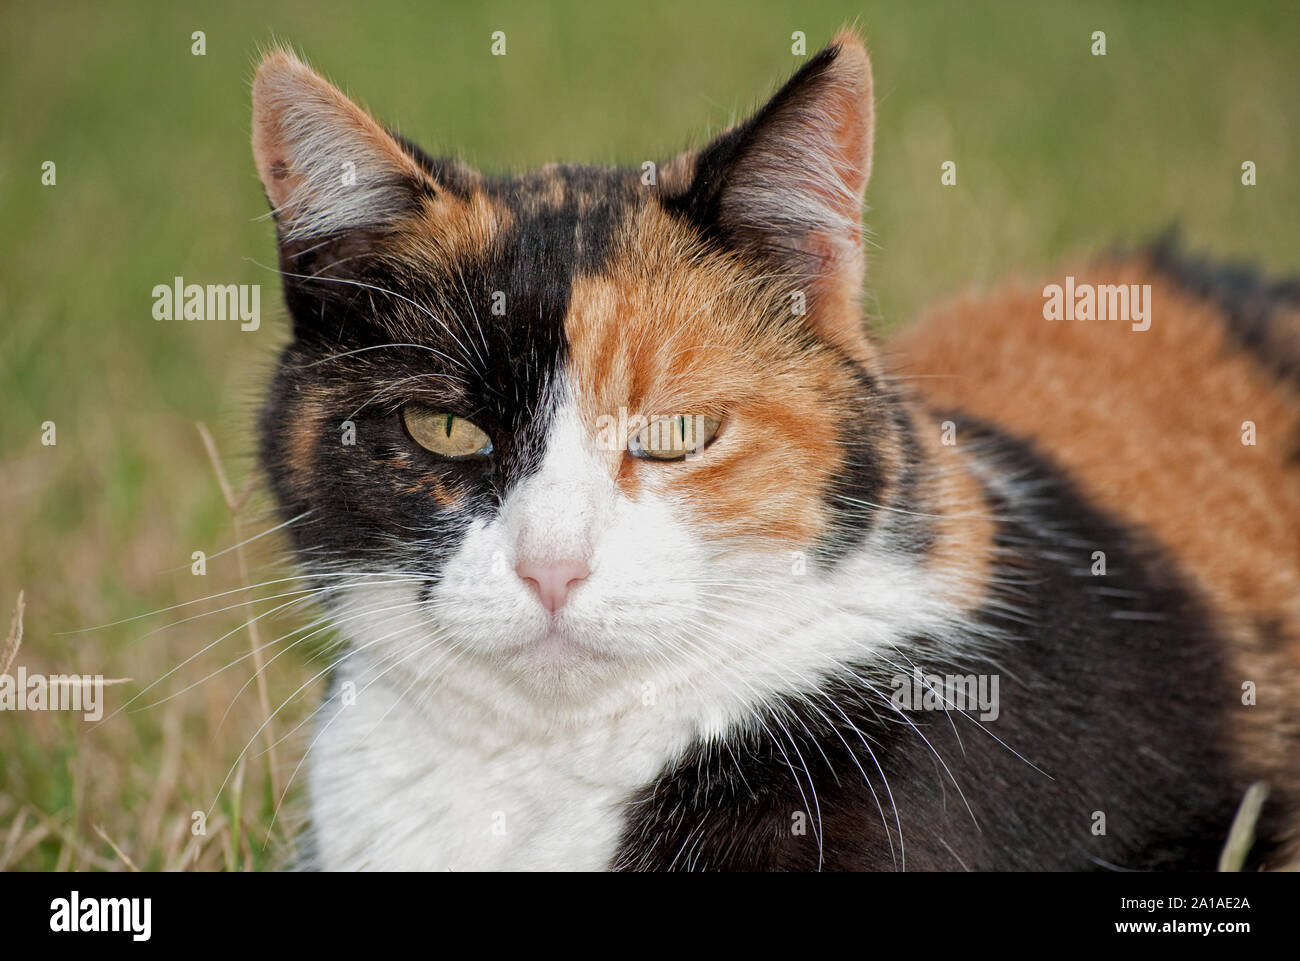 Closeup of a calico cat with different color face halves Stock Photo